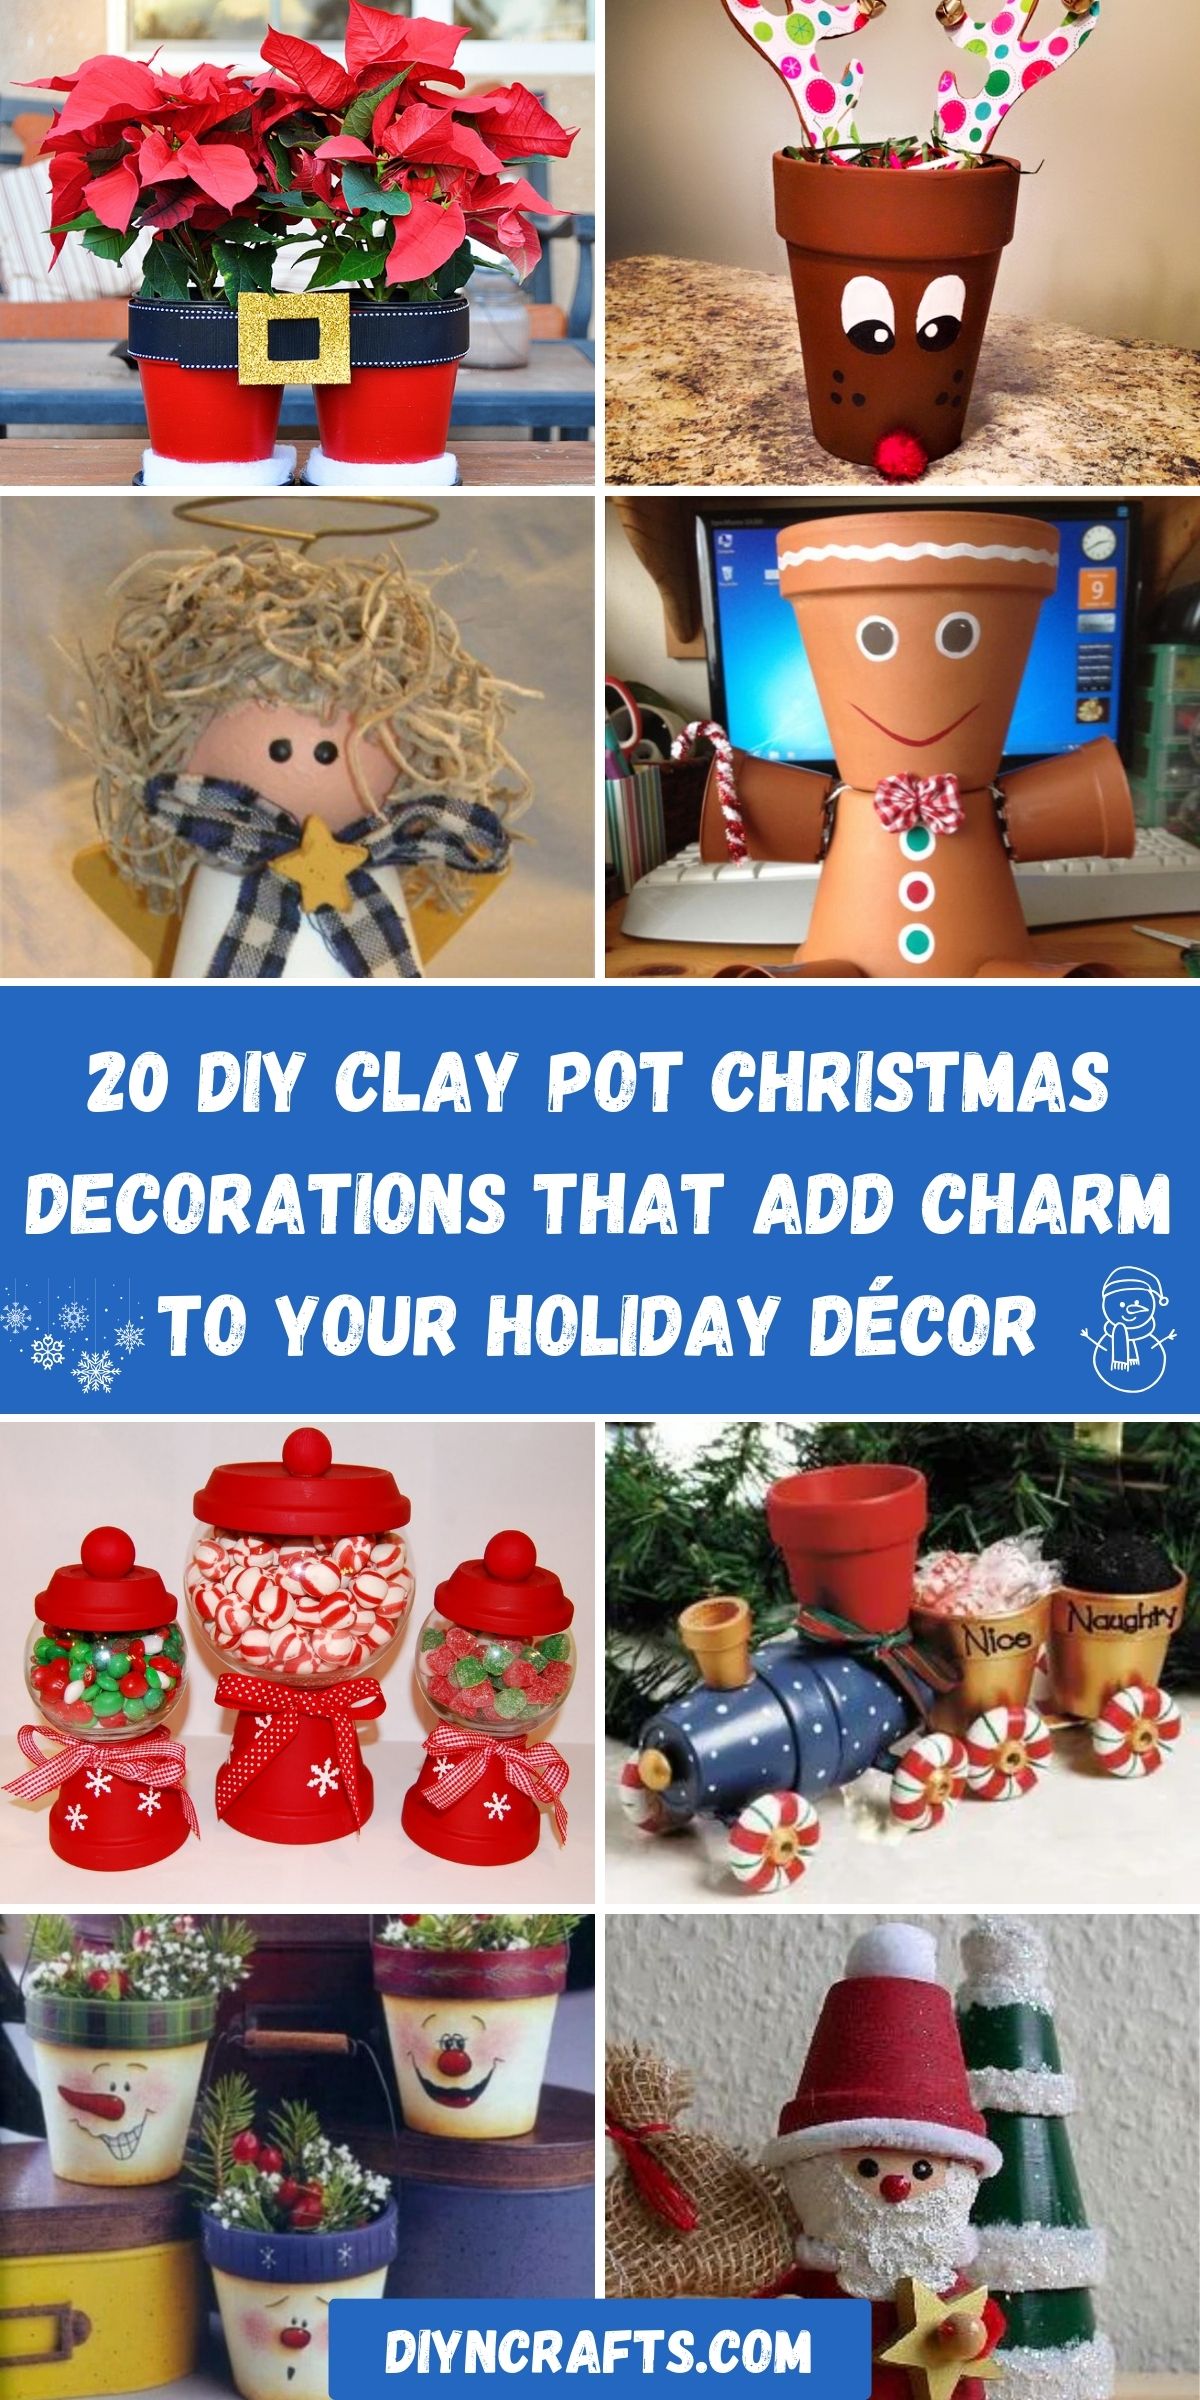 20 DIY Clay Pot Christmas Decorations That Add Charm To Your Holiday Décor collage.